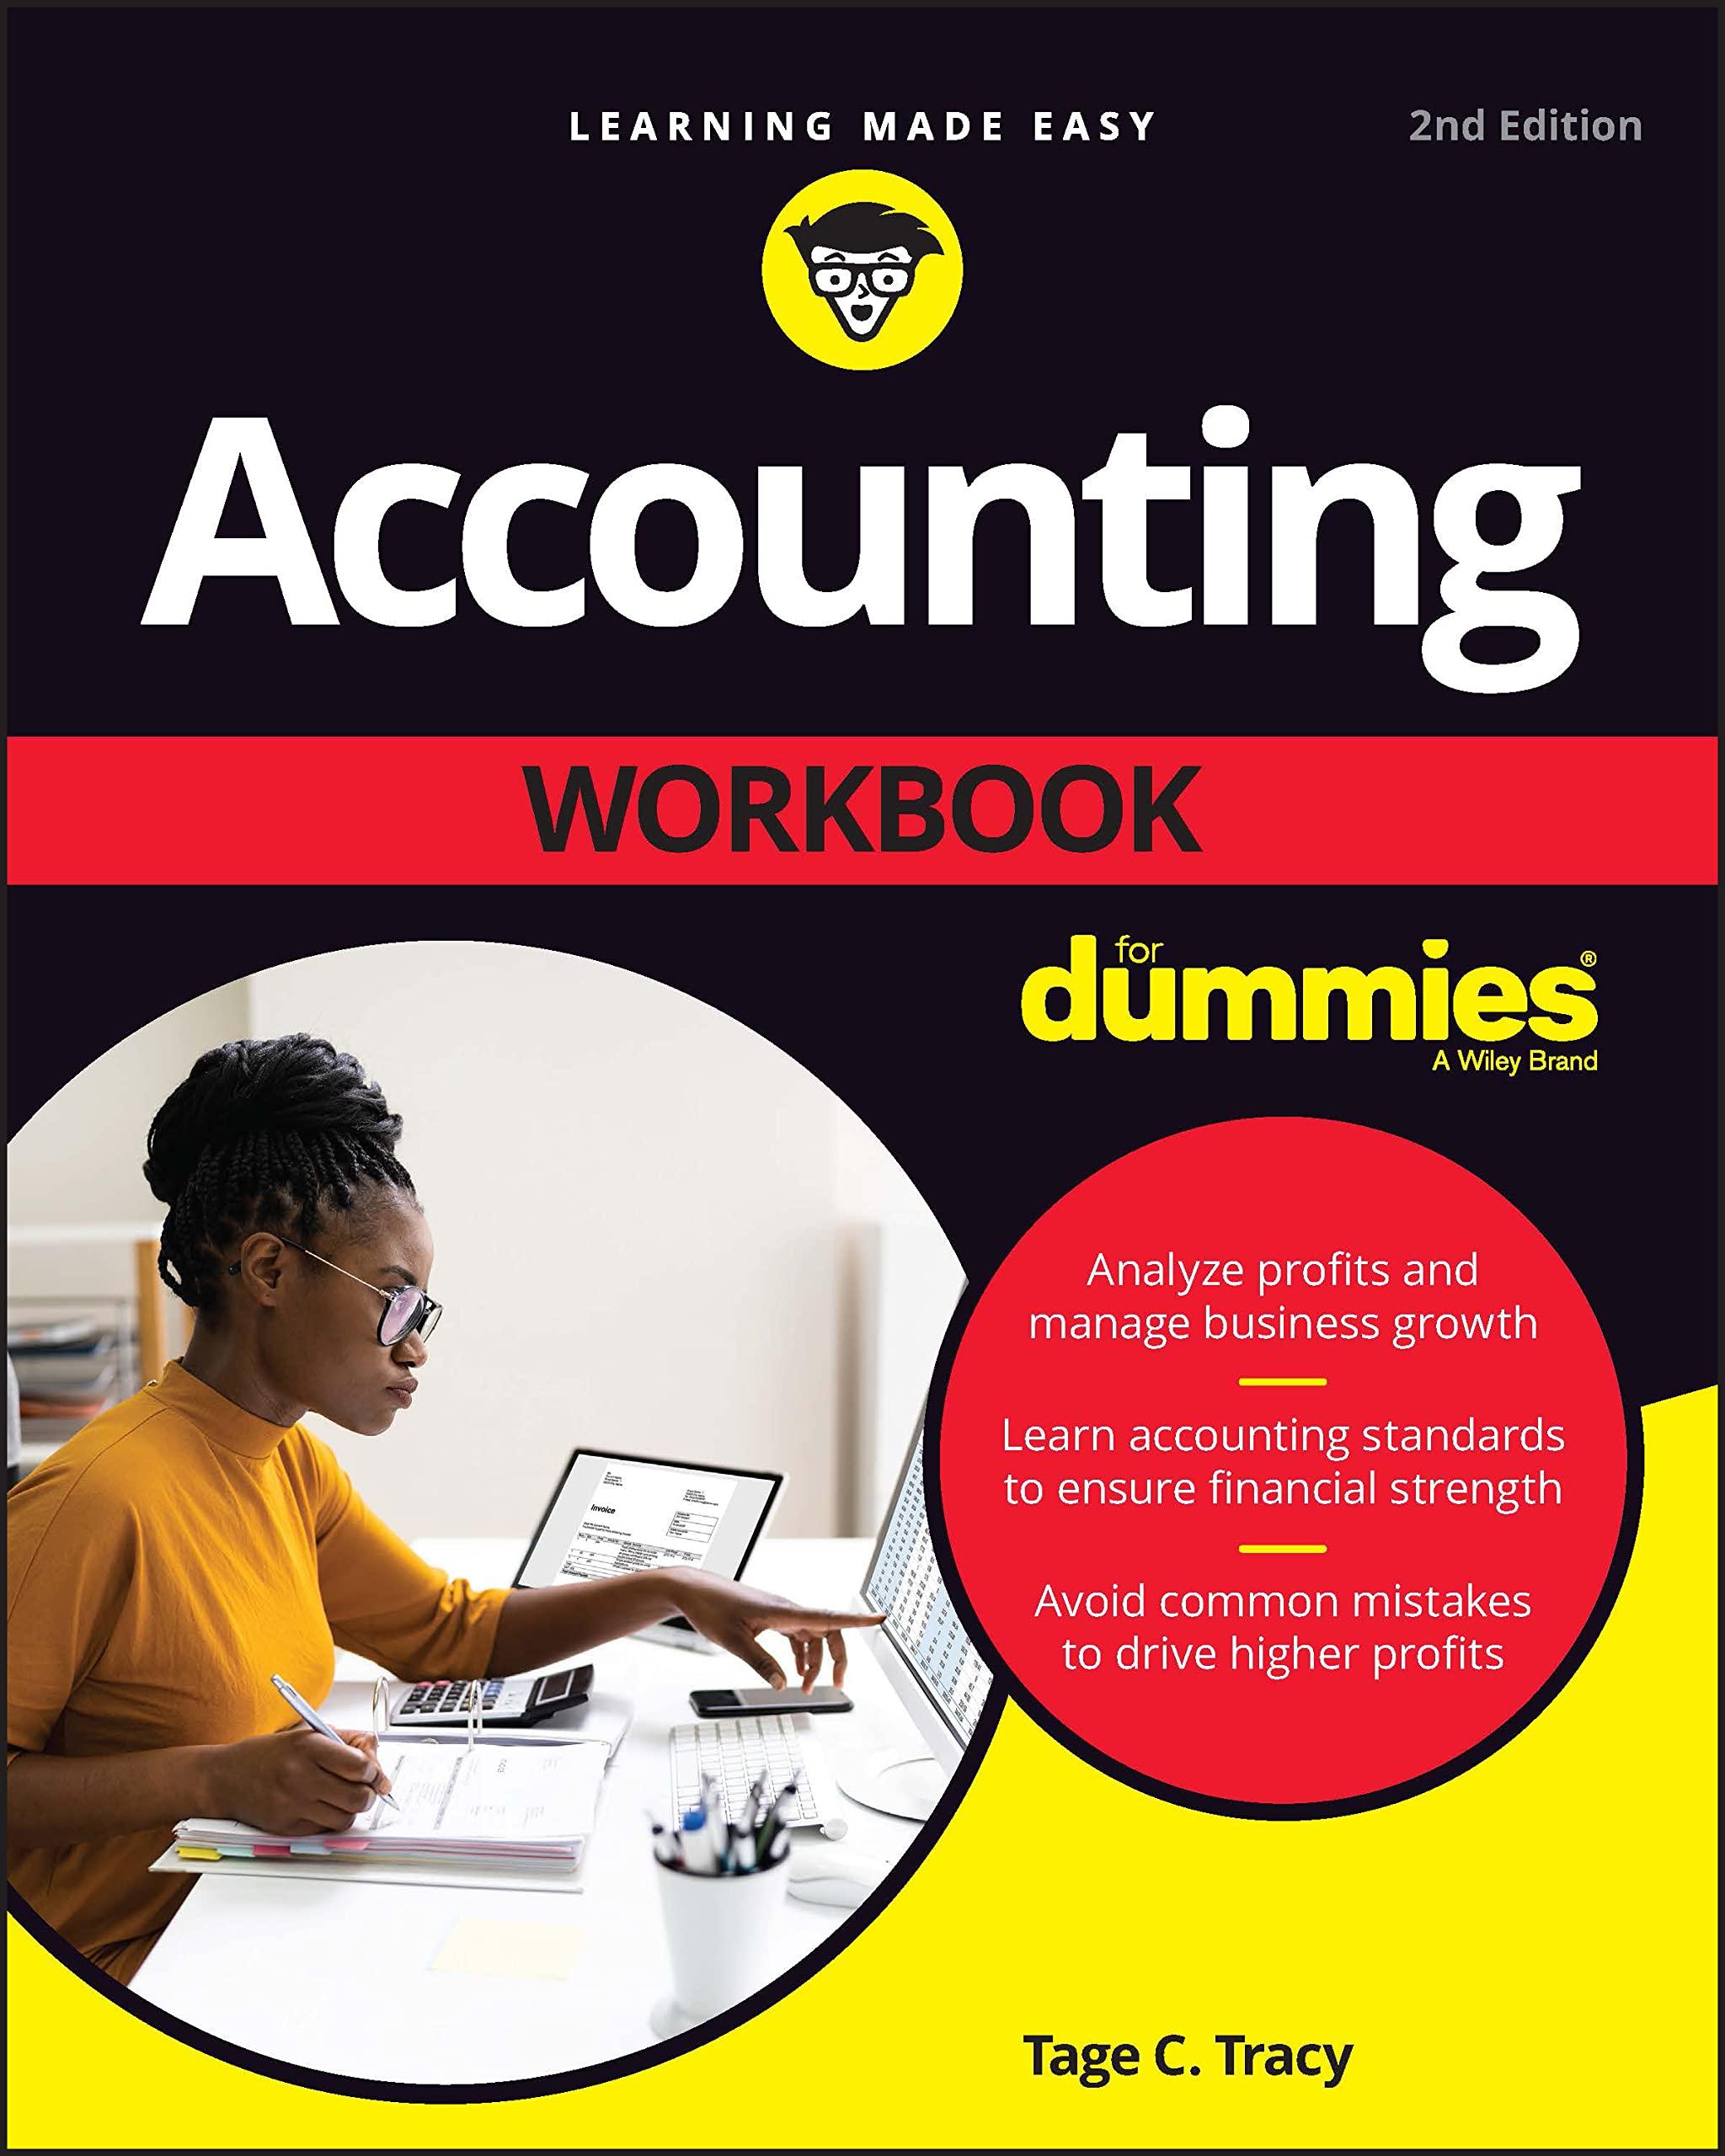 accounting workbook for dummies 2nd edition tage c. tracy 1119897637, 978-1119897637